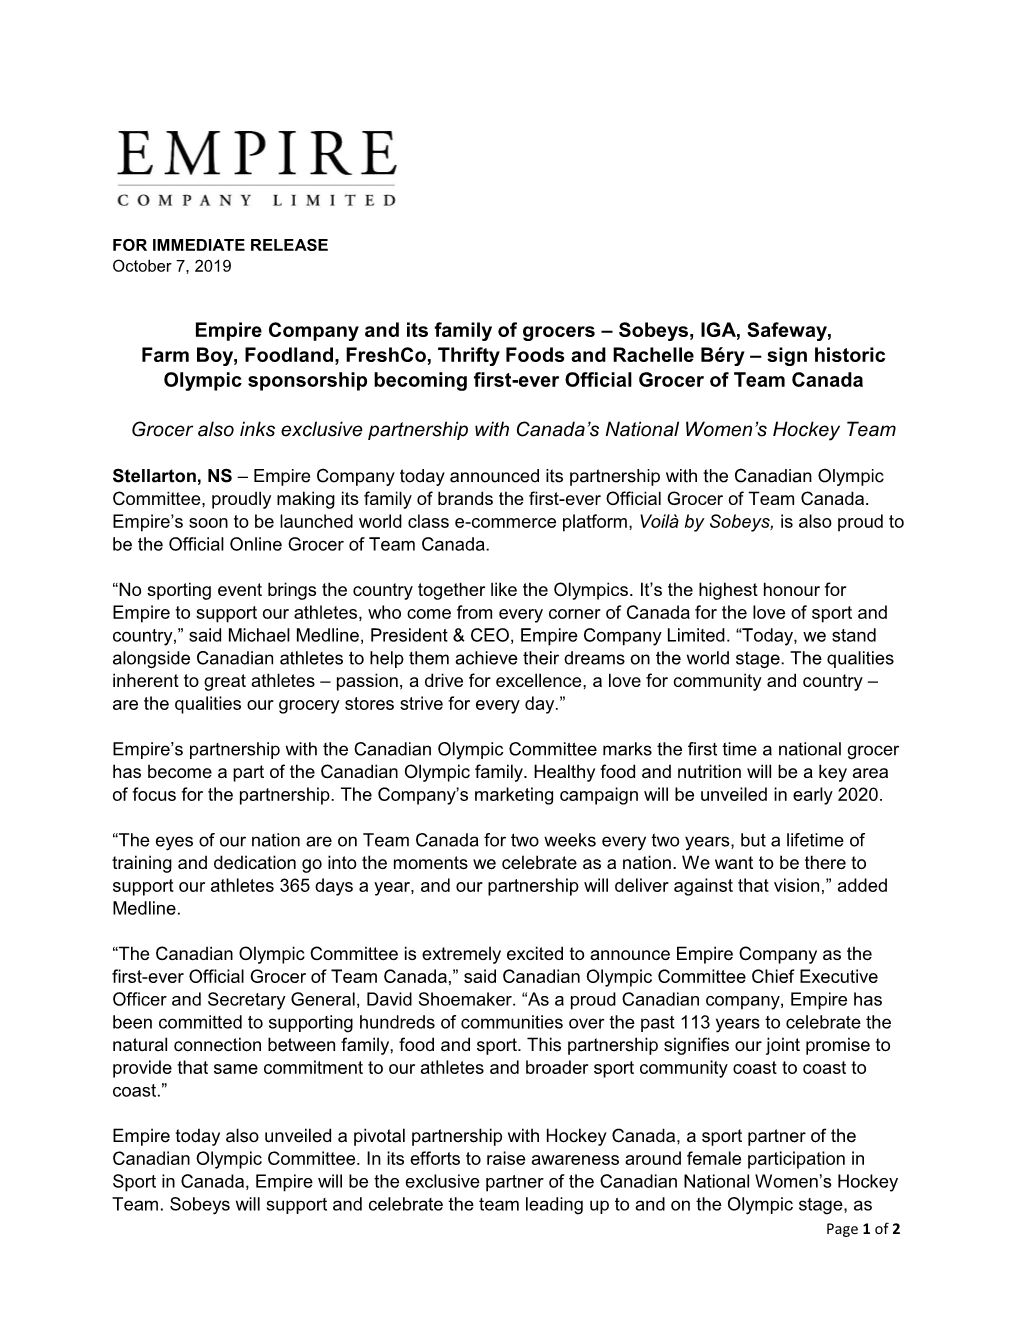 Empire Company and Its Family of Grocers – Sobeys, IGA, Safeway, Farm Boy, Foodland, Freshco, Thrifty Foods and Rachelle